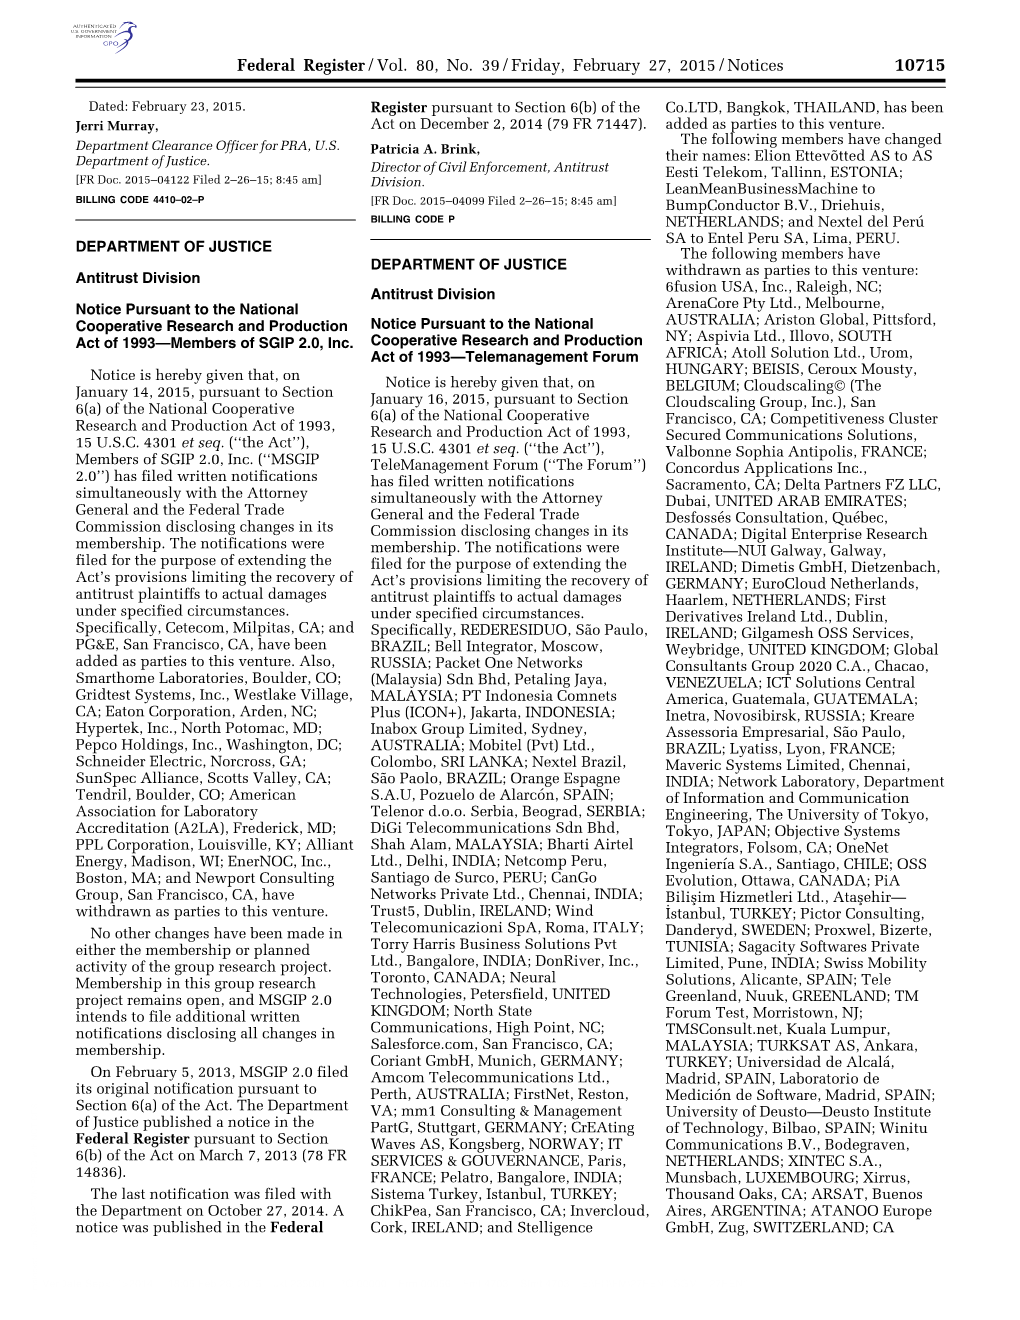 Federal Register/Vol. 80, No. 39/Friday, February 27, 2015/Notices